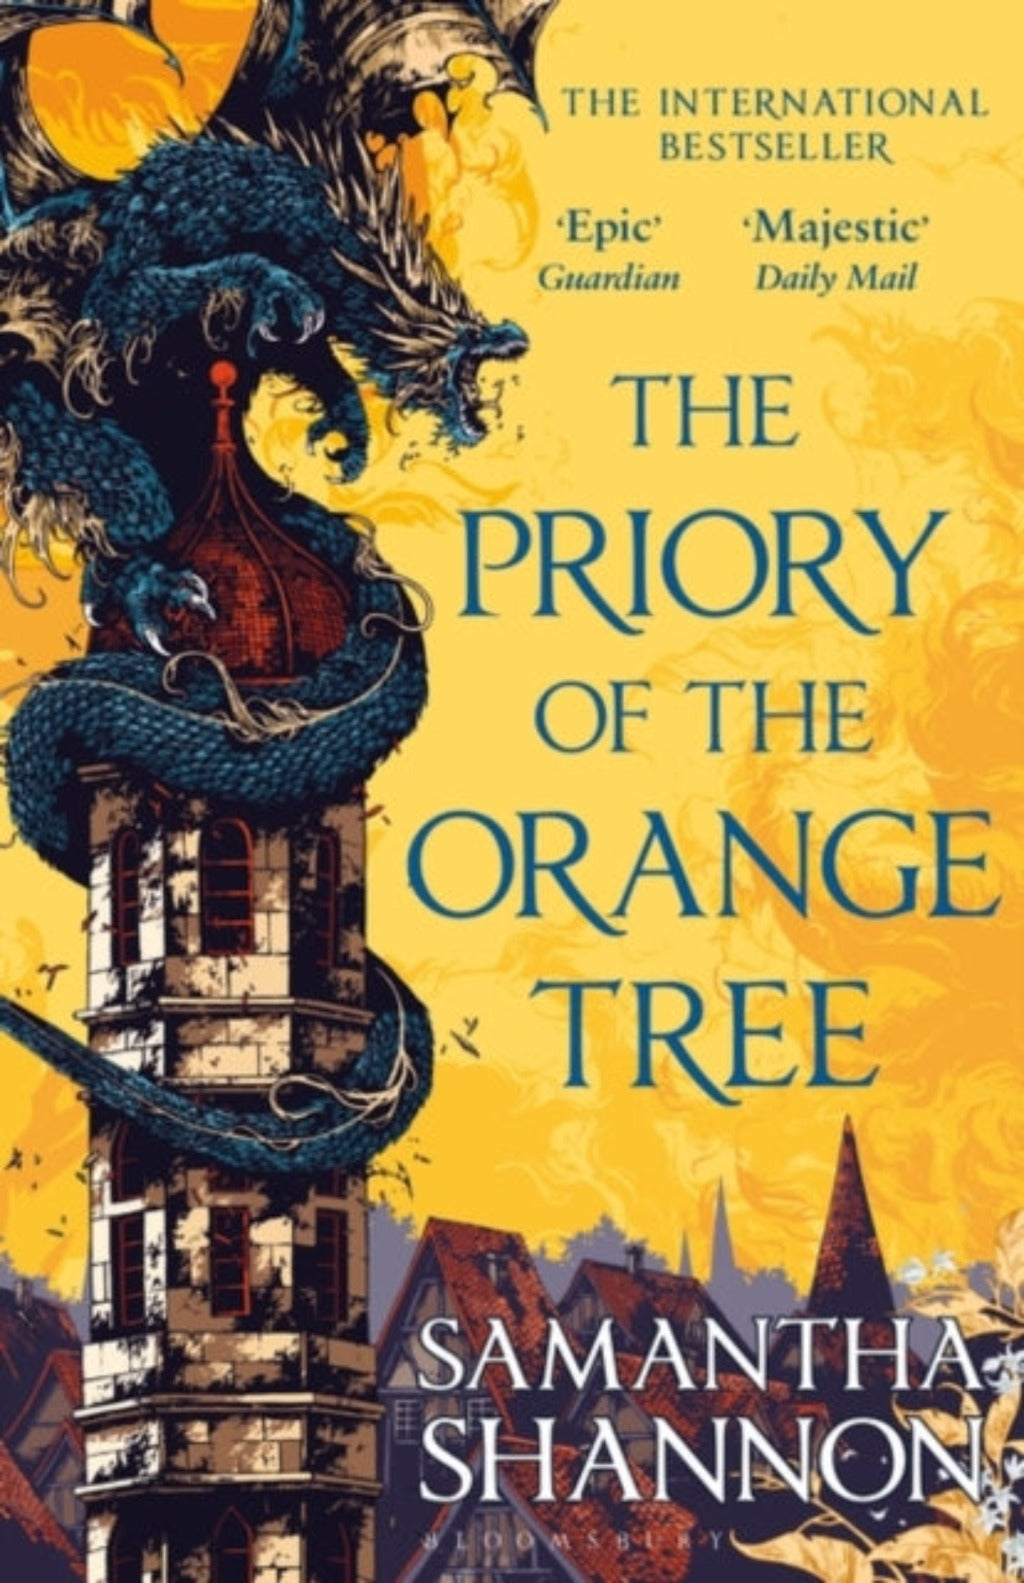 An image of the cover for The Priory of the Orange Tree by Samantha Shannon